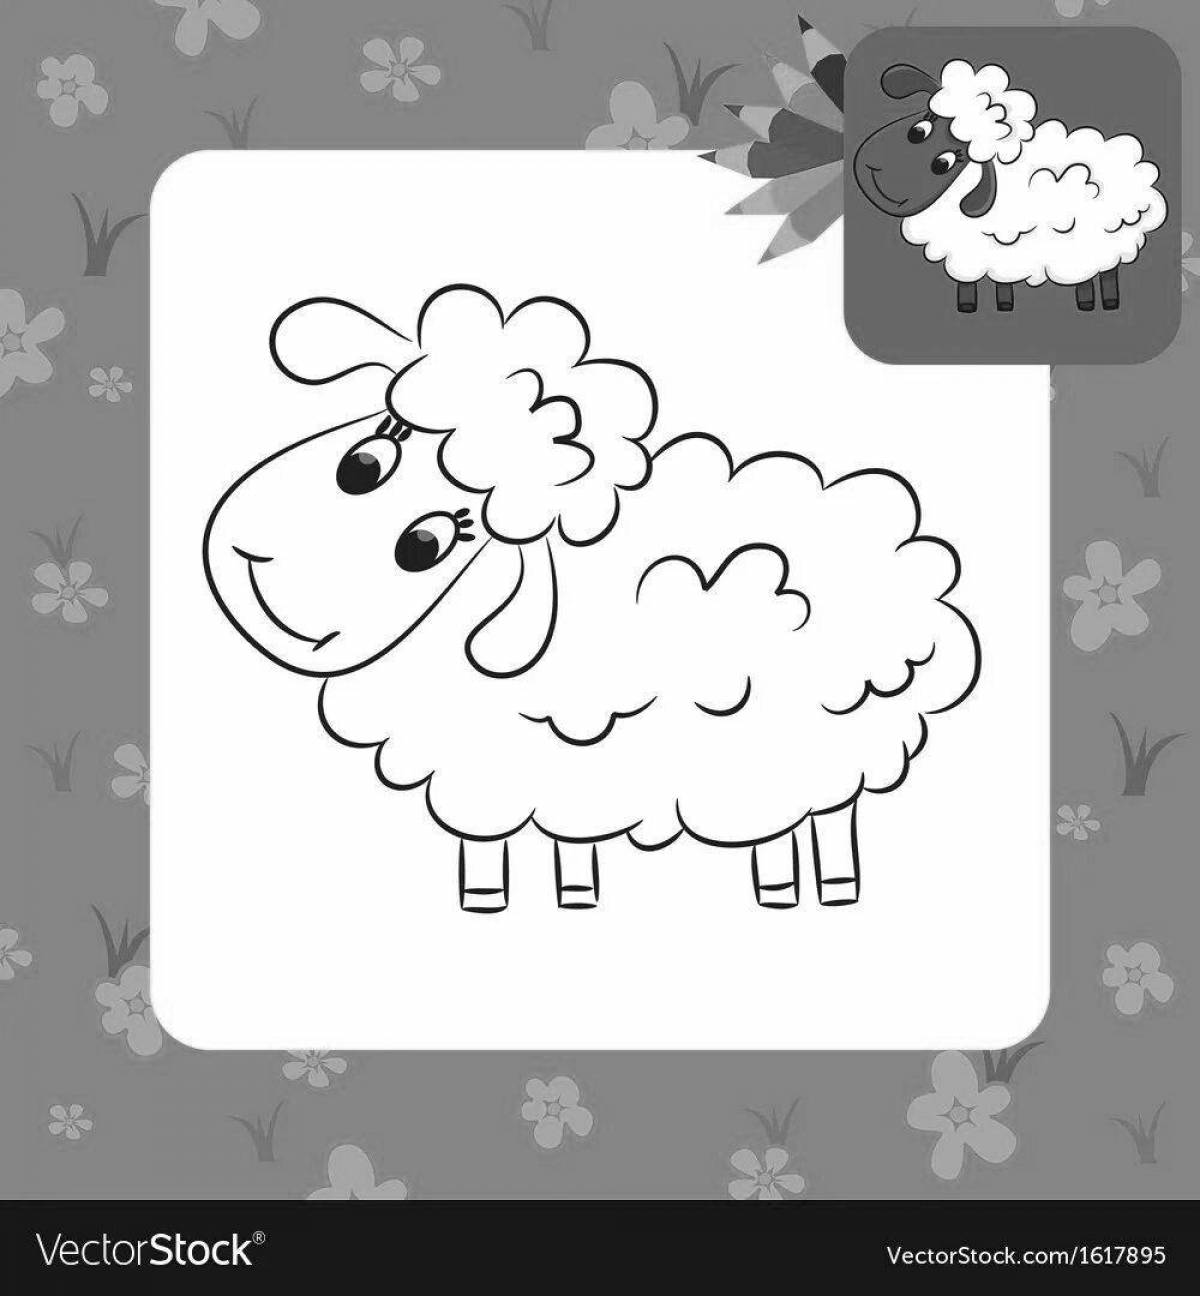 A playful lamb coloring book for 2-3 year olds